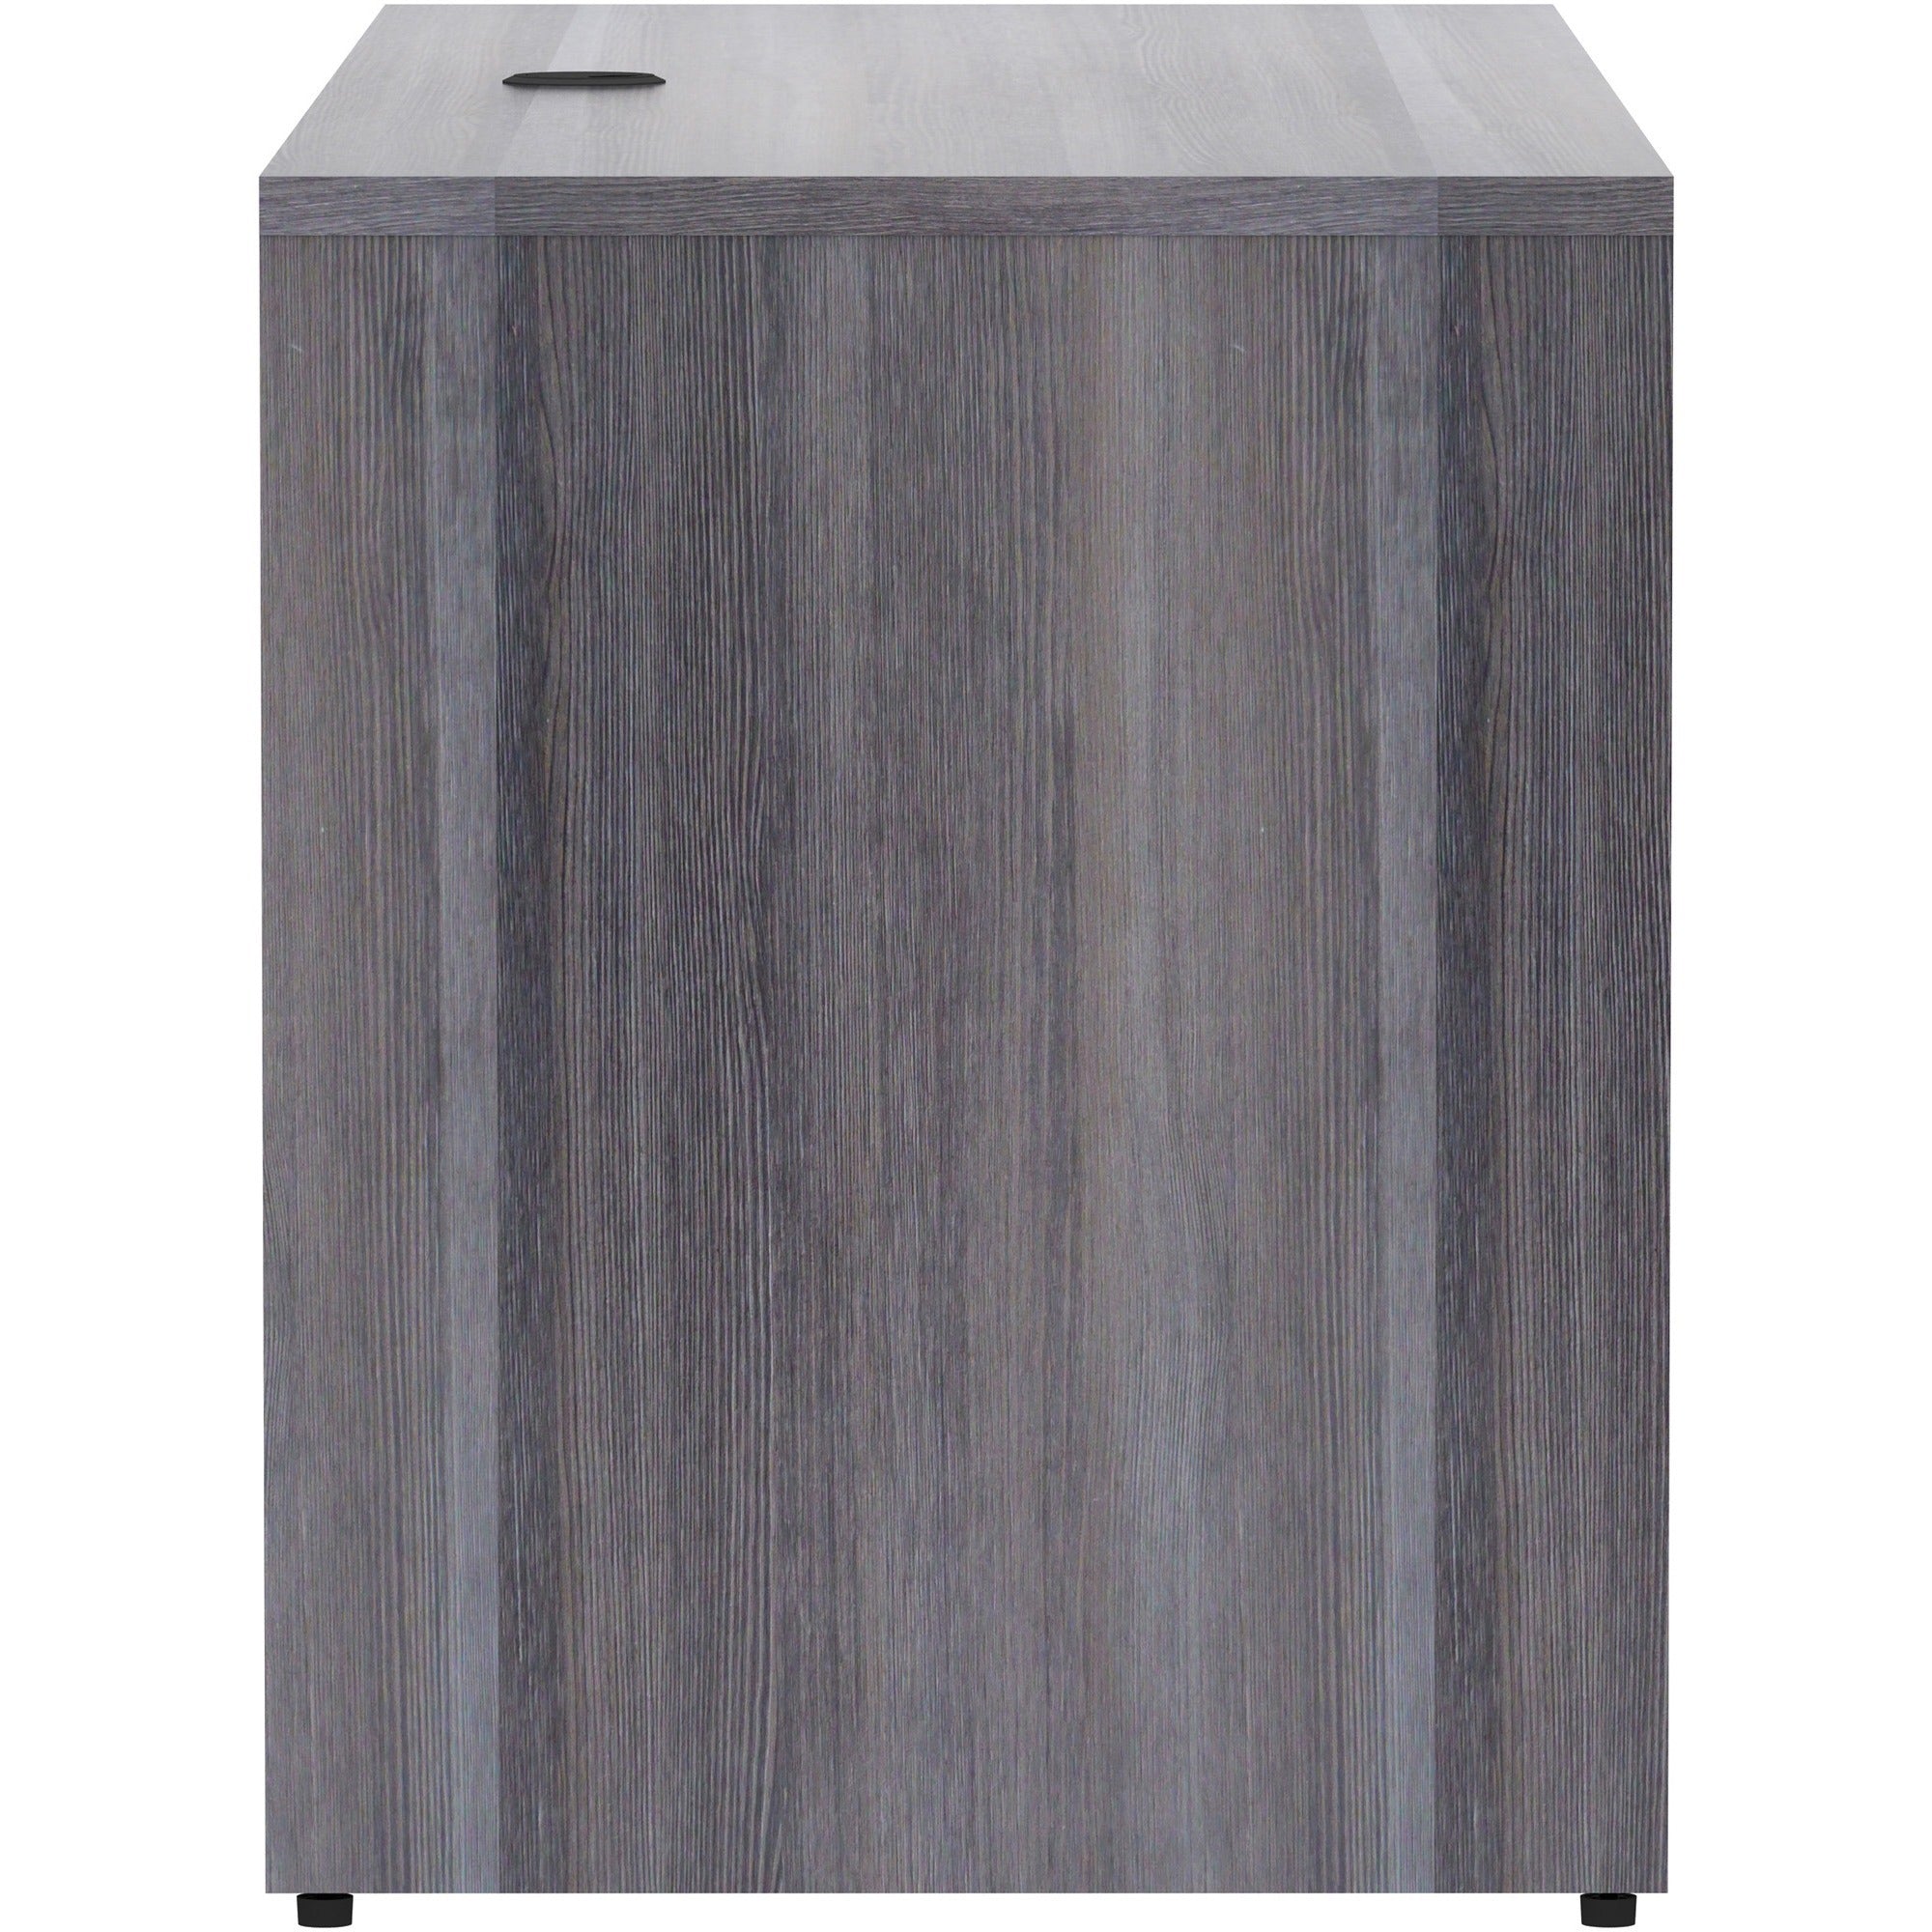 lorell-essentials-series-credenza-shell-66-x-24295-credenza-shell-1-top-finish-weathered-charcoal-laminate-silver-brush_llr69596 - 4